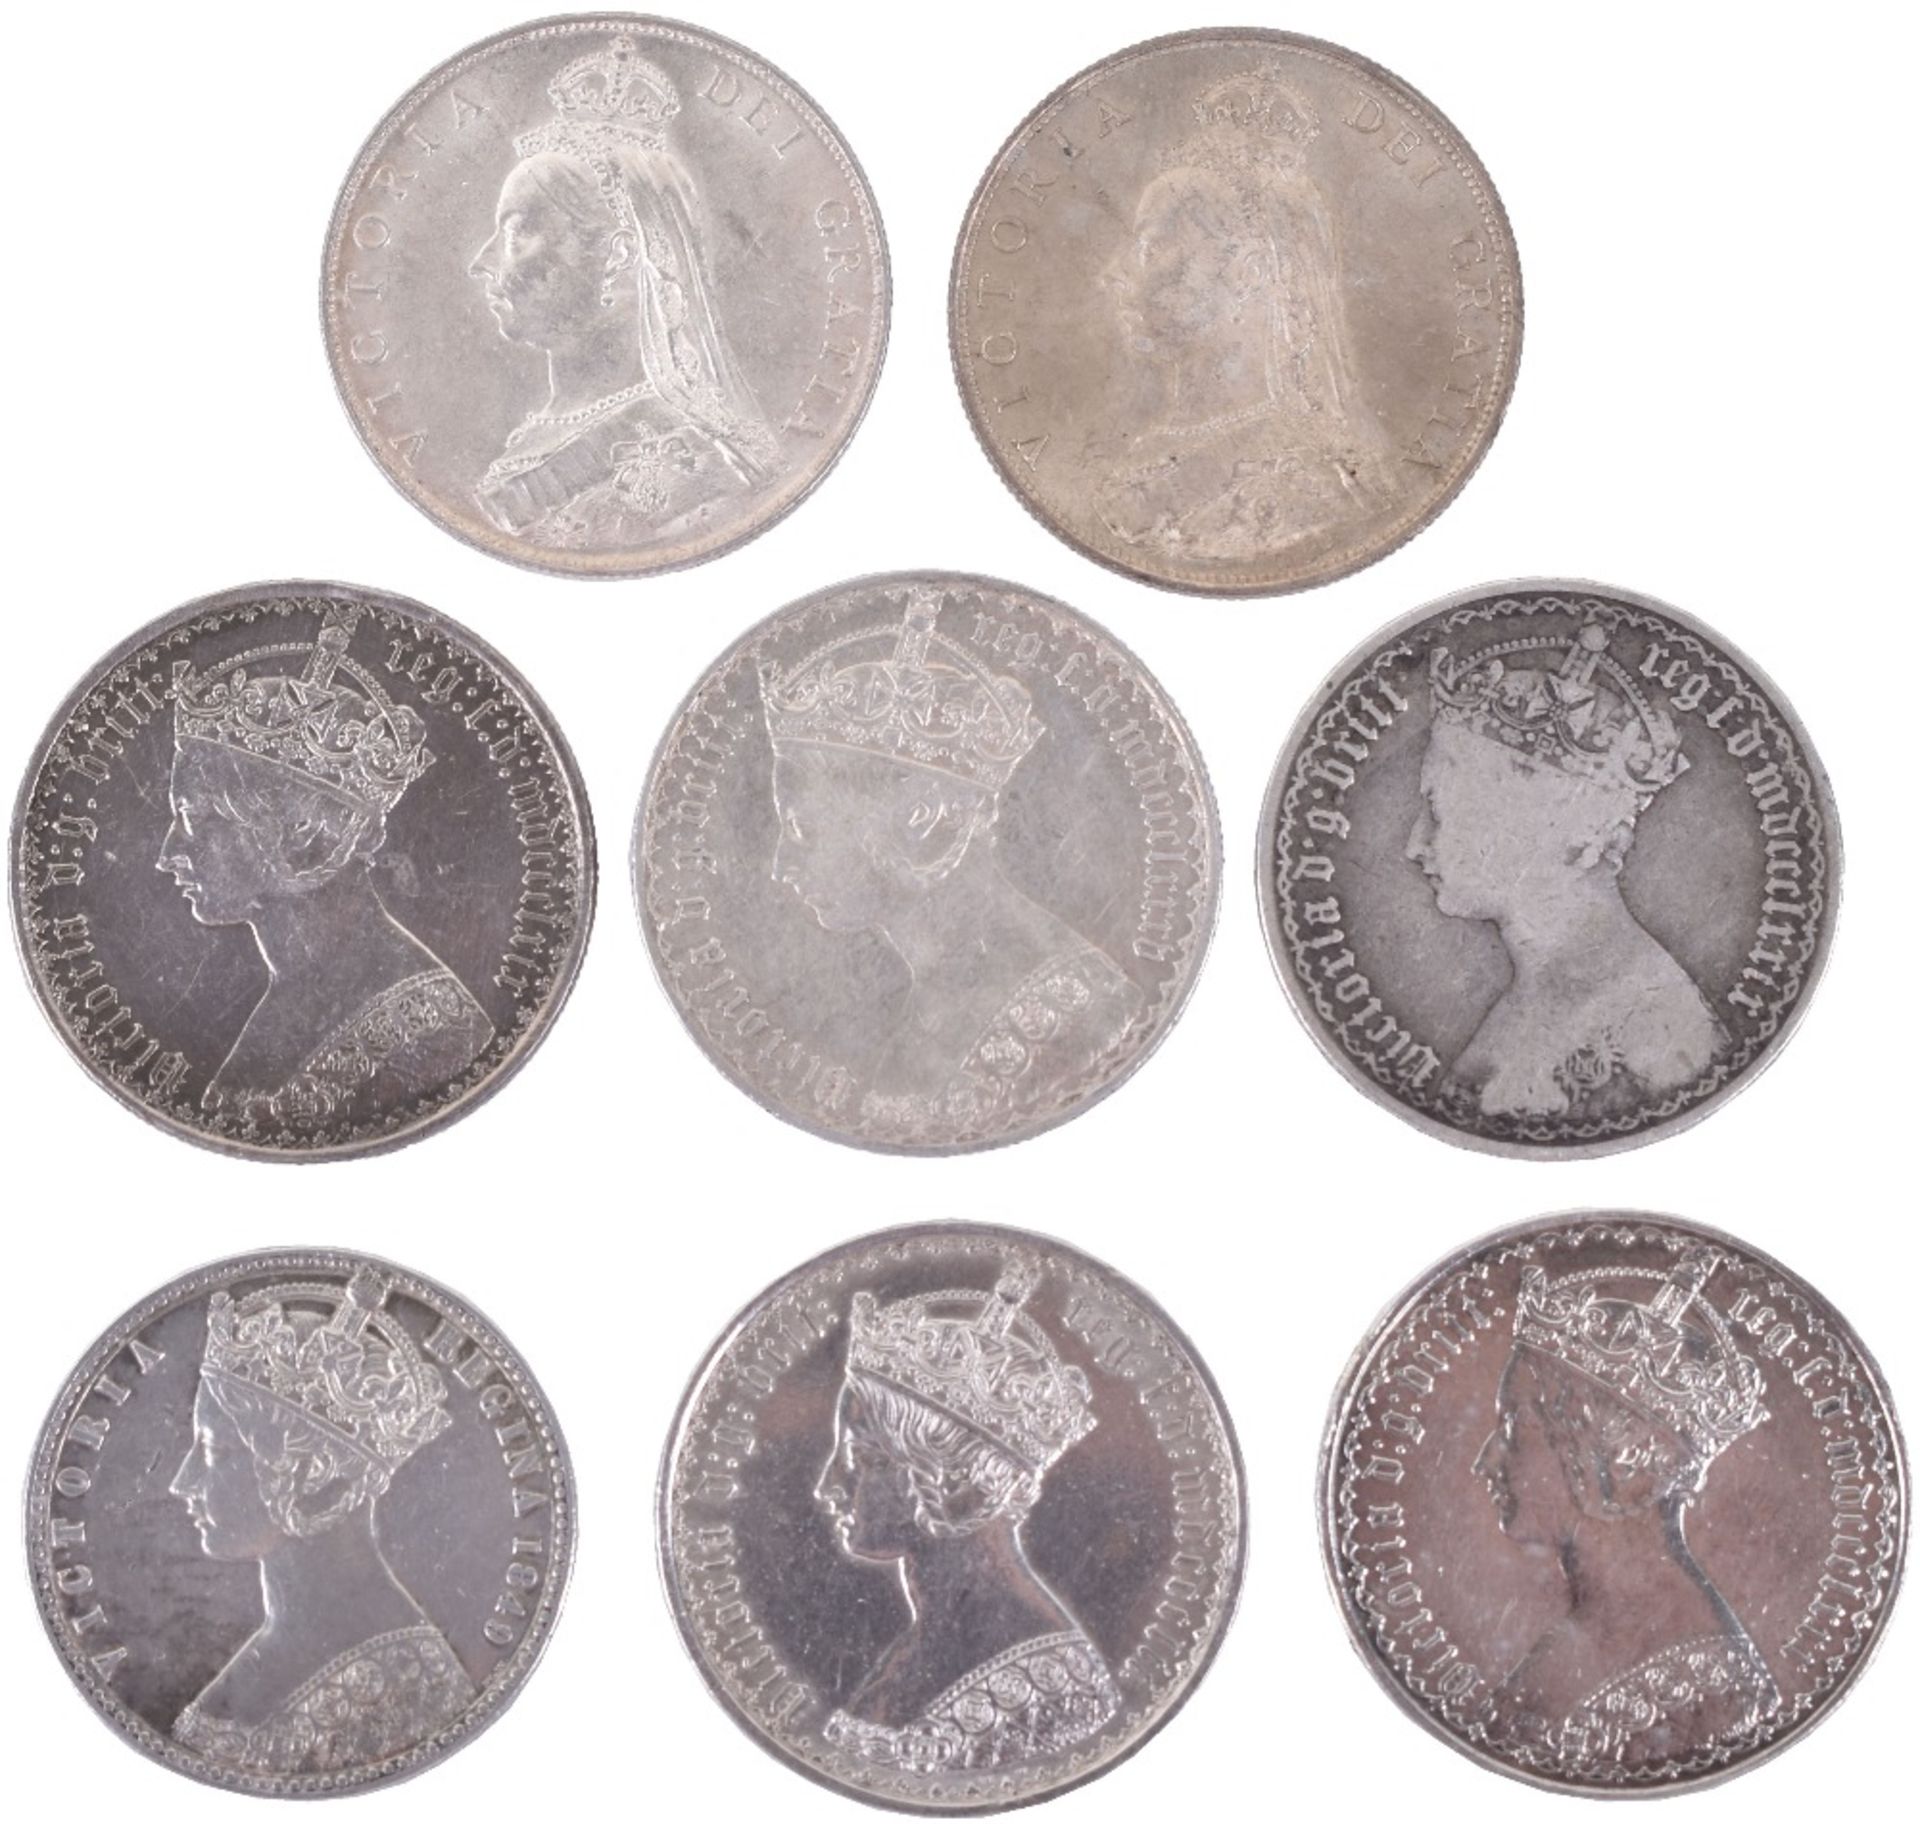 Victoria Florins, 1887 and 1888, Godless 1849, Gothic type 1852, 1869, 1879, 1880, 1885